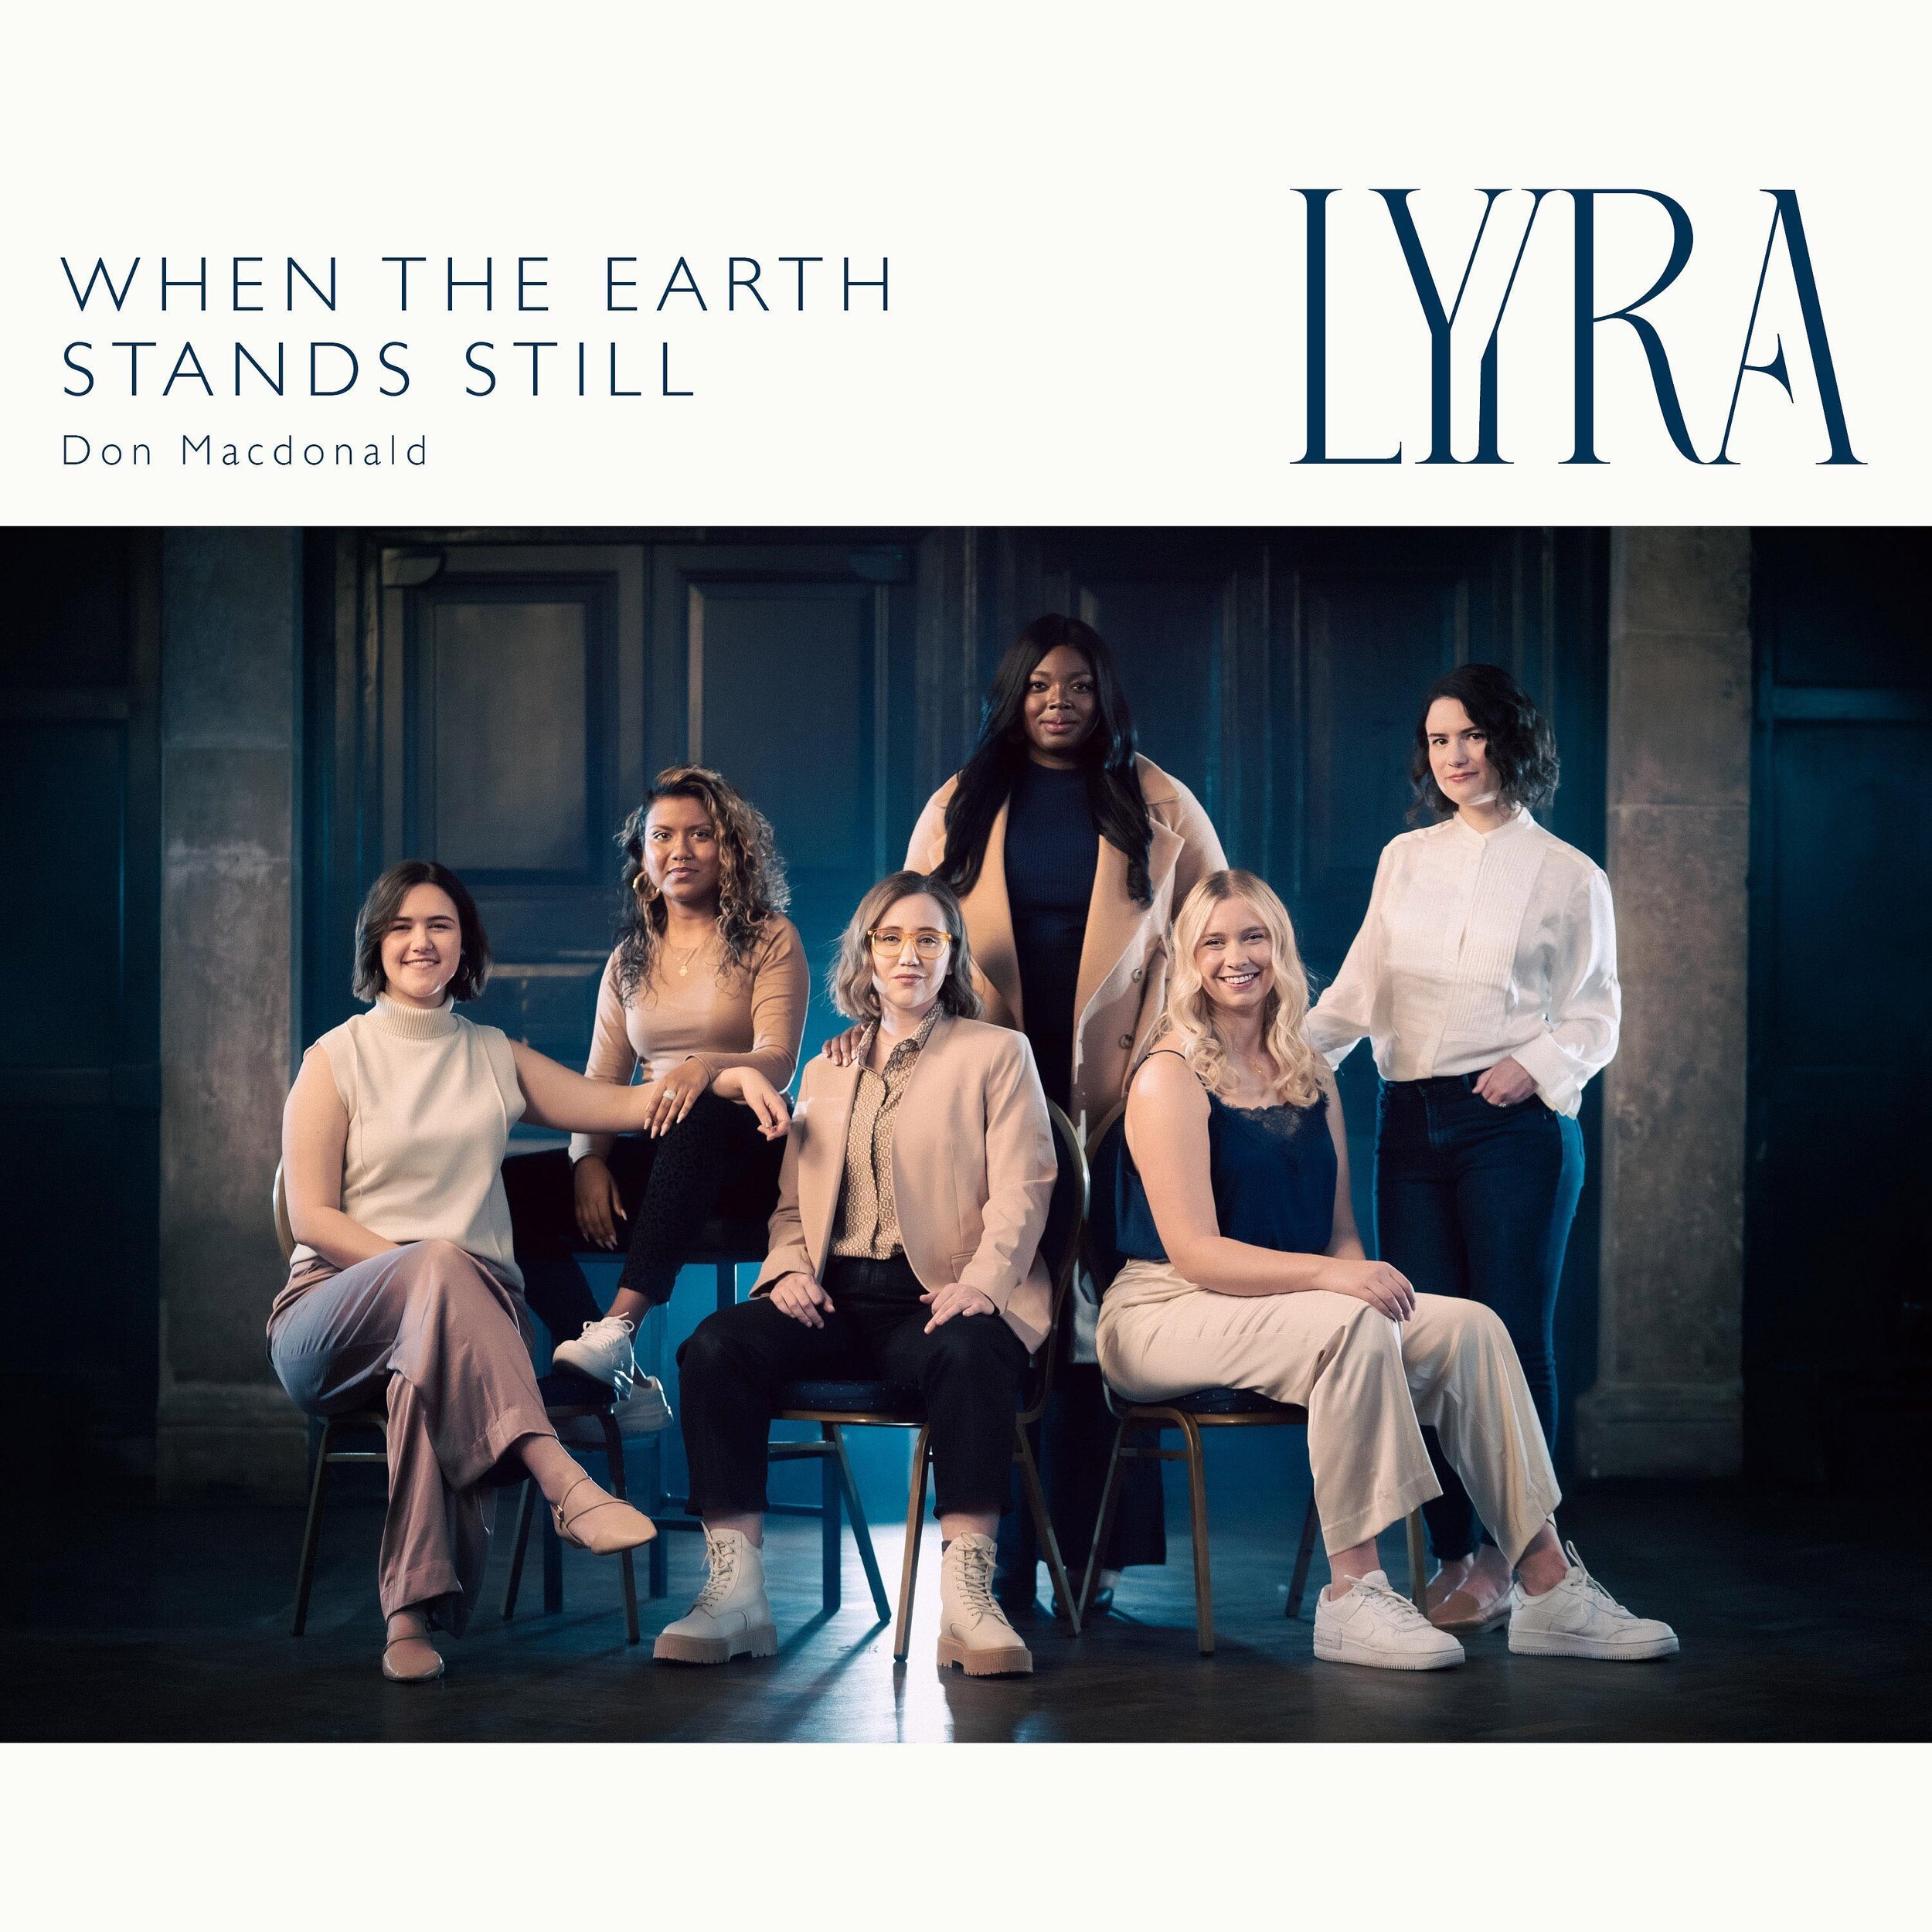 LYYRA&rsquo;s debut single, &lsquo;When The Earth Stands Still&rsquo; by Don Macdonald out now #VOCES8Records 🎶

Stream now on your favourite streaming platform.

We can&rsquo;t wait to share more from these exceptional women. @lyyra_official @macdc